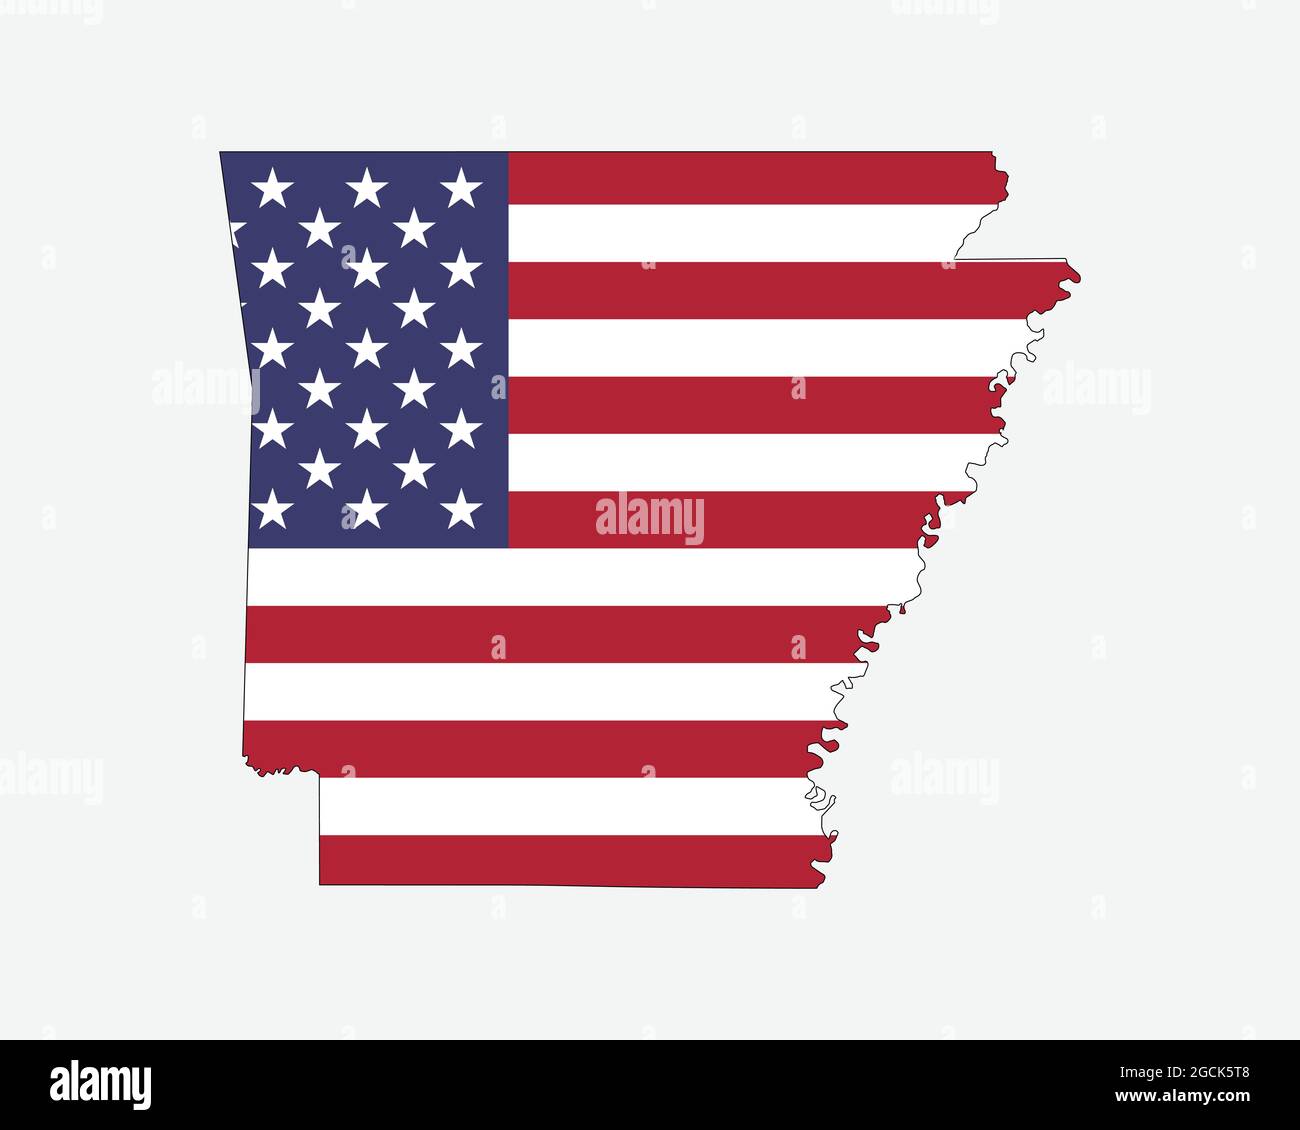 Arkansas Map on American Flag. AR, USA State Map on US Flag. EPS Vector Graphic Clipart Icon Stock Vector